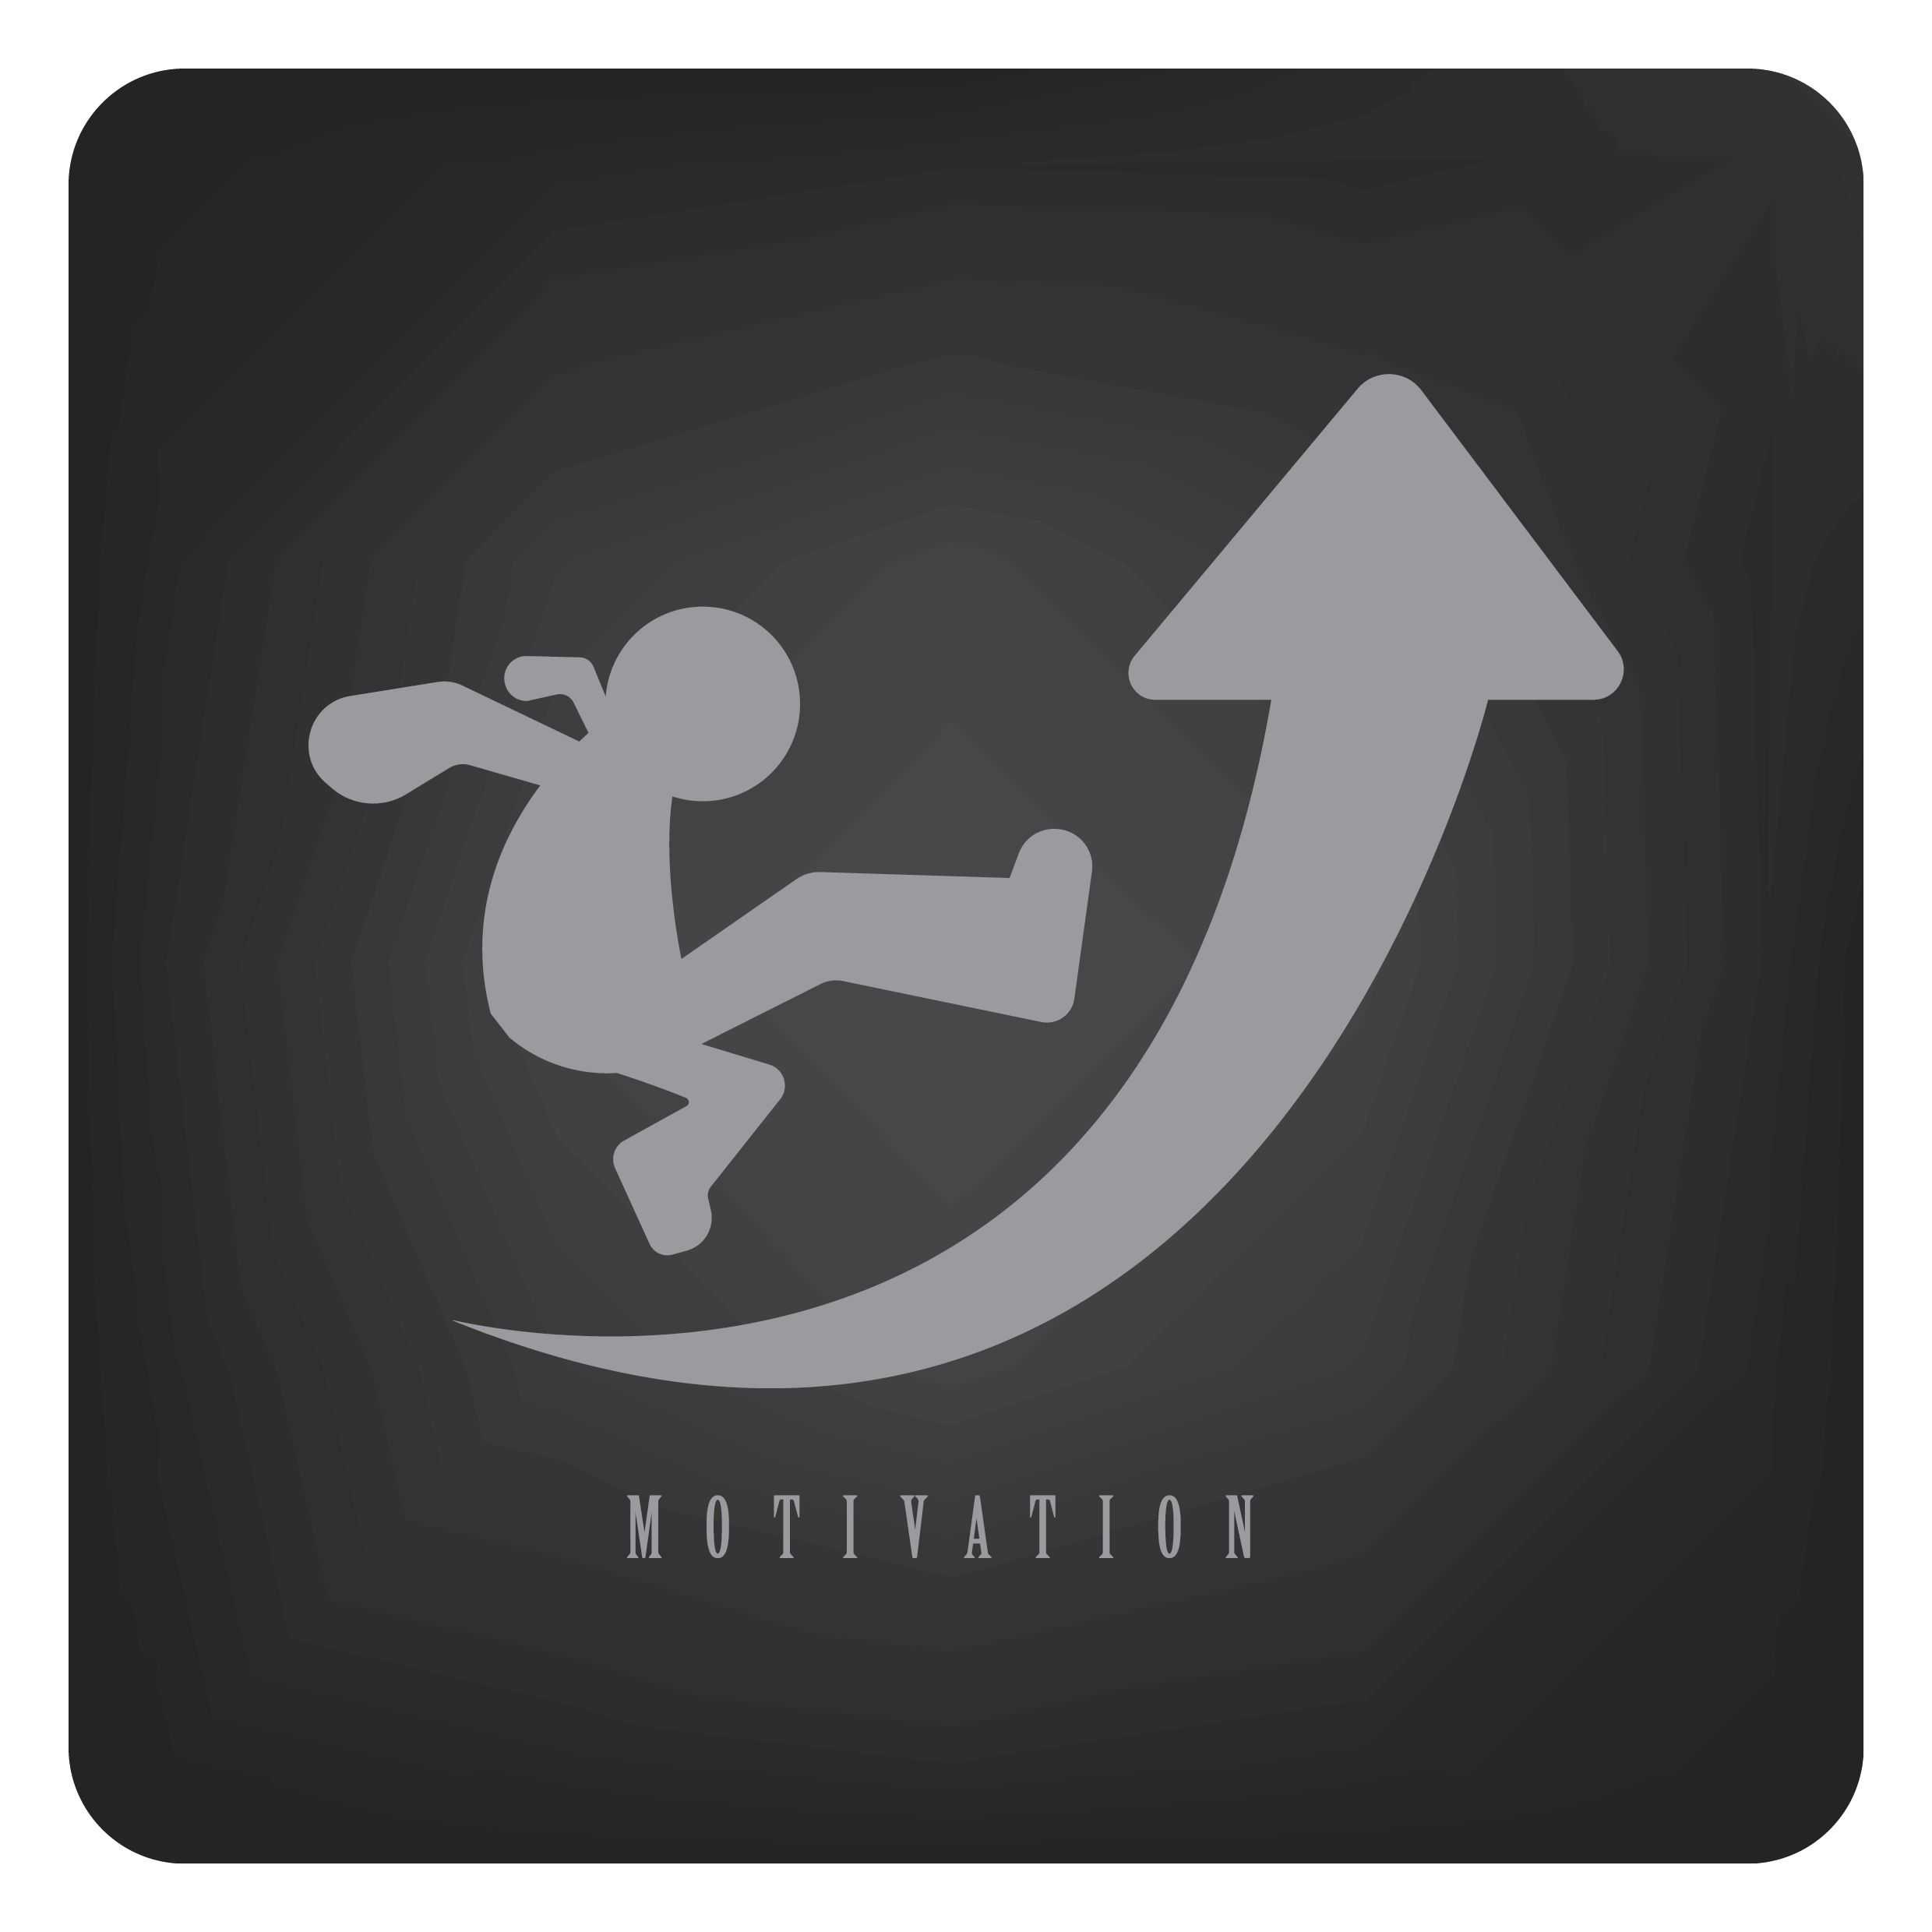 Self-Motivation: How to Motivate Yourself to Do Great Things